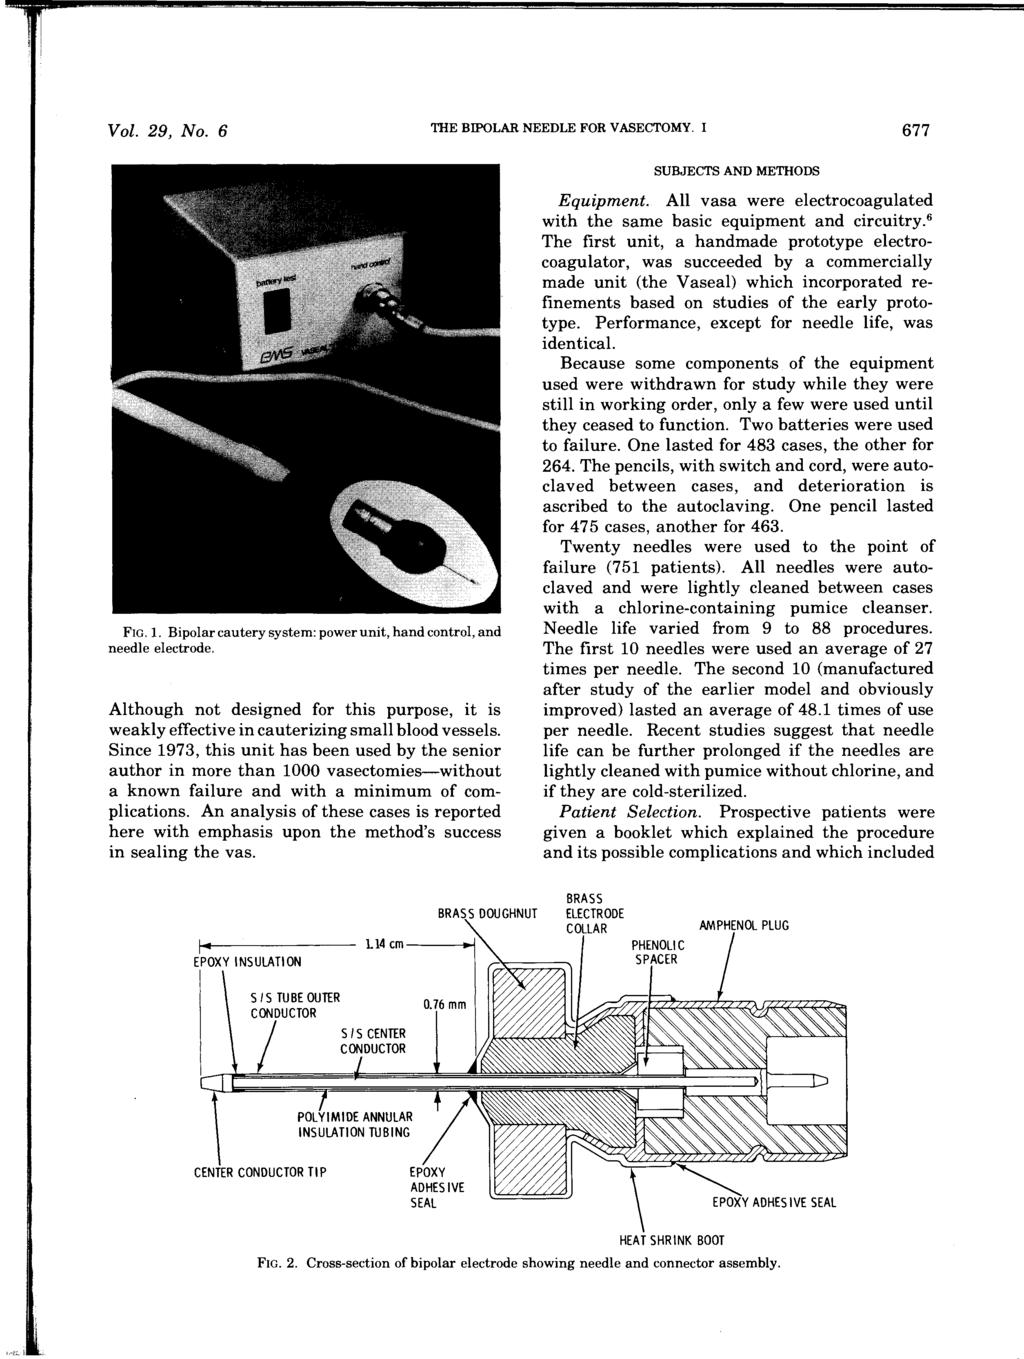 Vol. 29, No.6 THE BIPOLAR NEEDLE FOR VASECTOMY. I 677 SUBJECTS AND METHODS FIG. 1. Bipolar cautery system: power unit, hand control, and needle electrode.